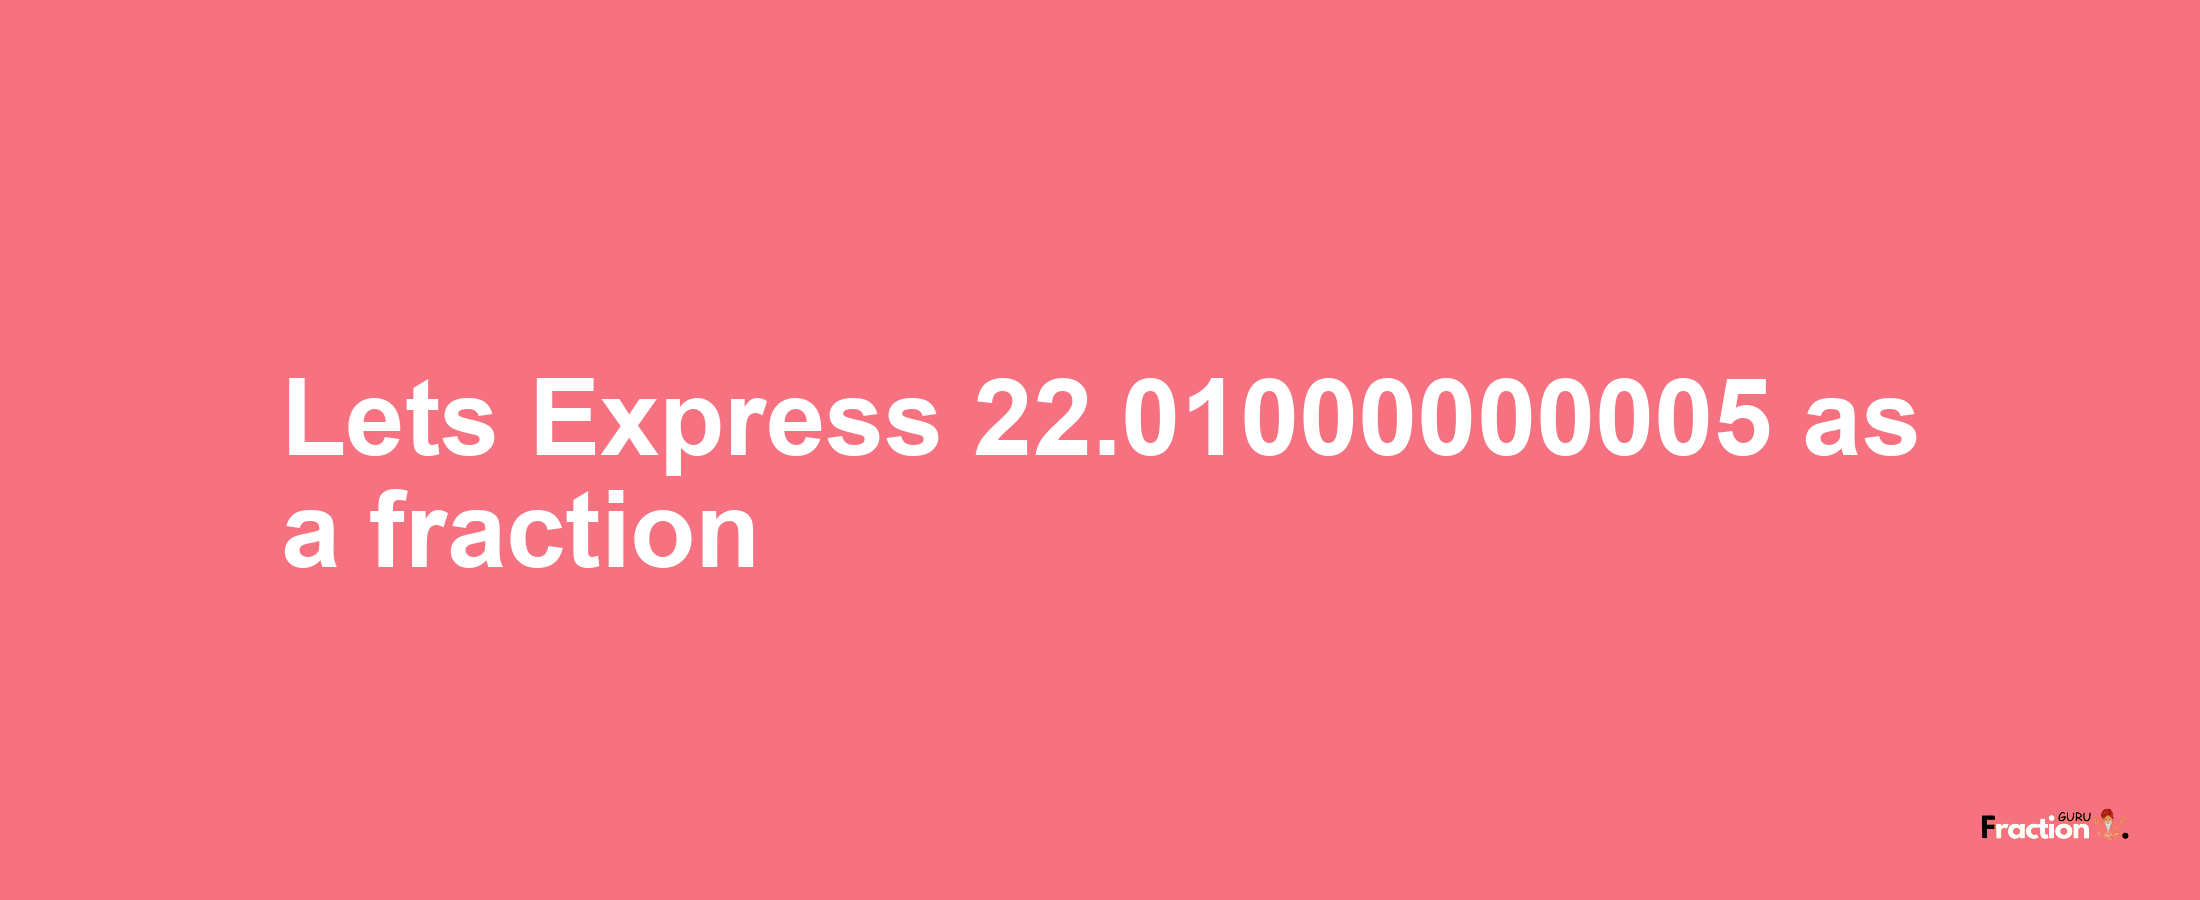 Lets Express 22.01000000005 as afraction